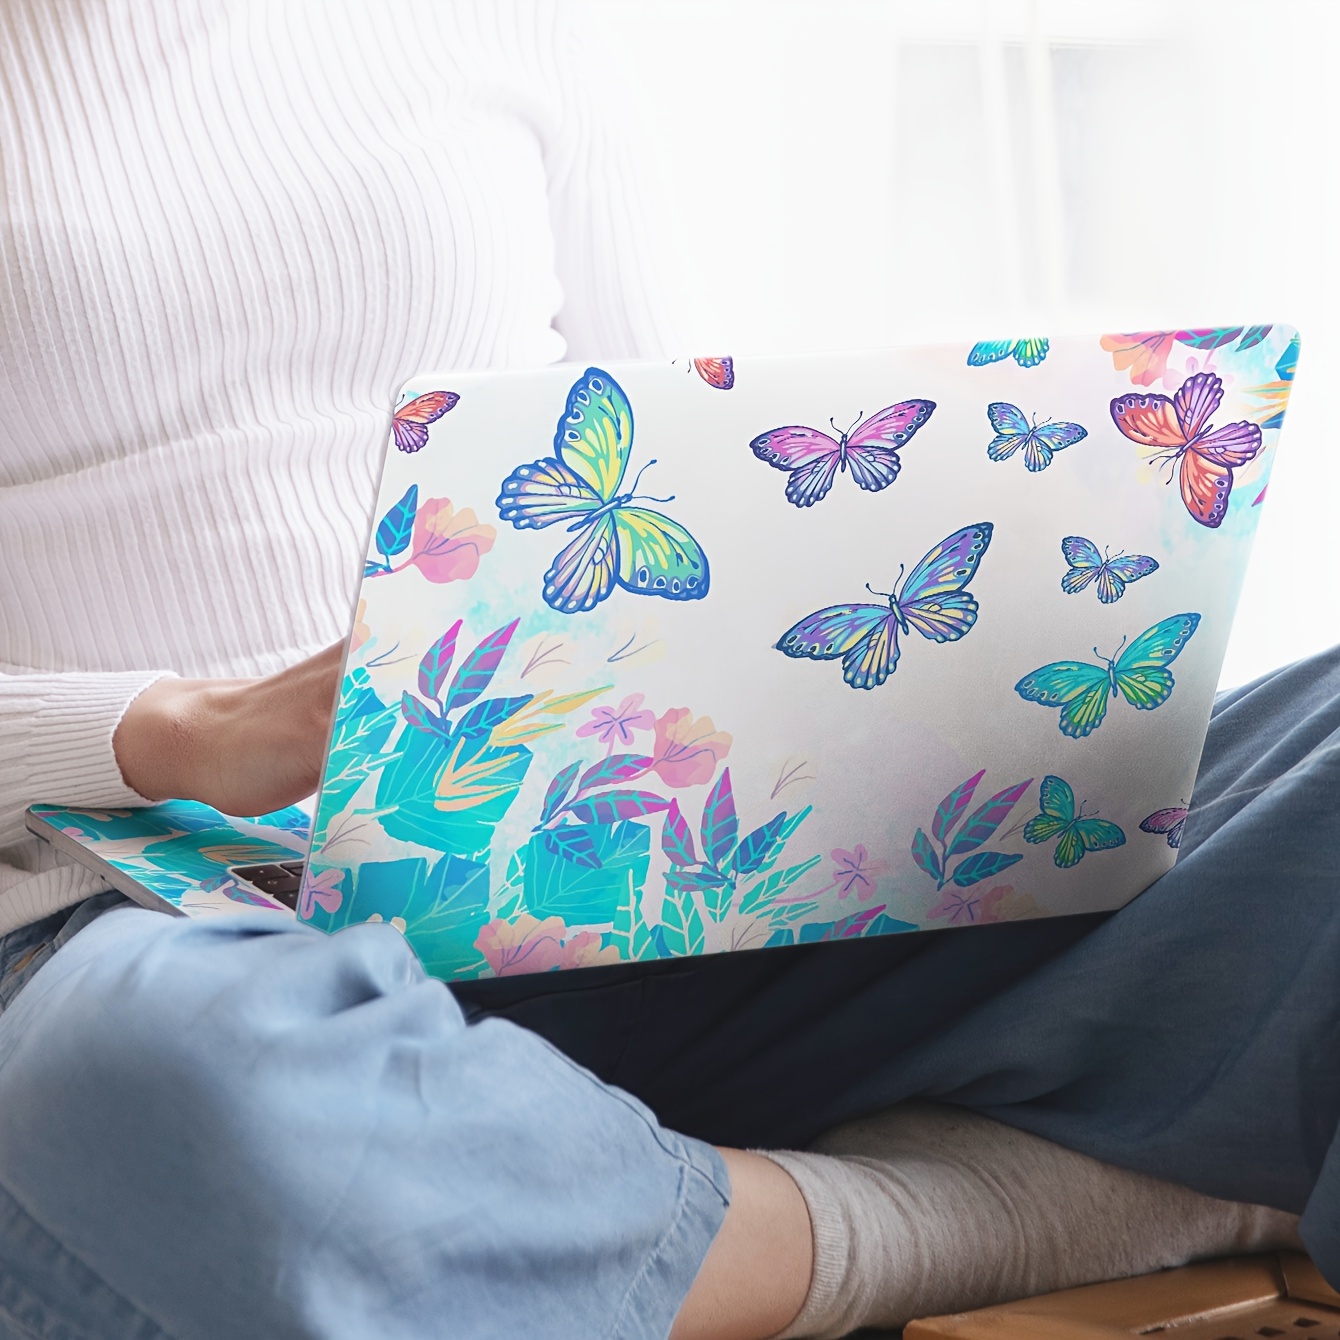 

'butterfly' Sticker Is Suitable For Laptop Decals, Computer Case Protective Film, Laptop Skin Decals